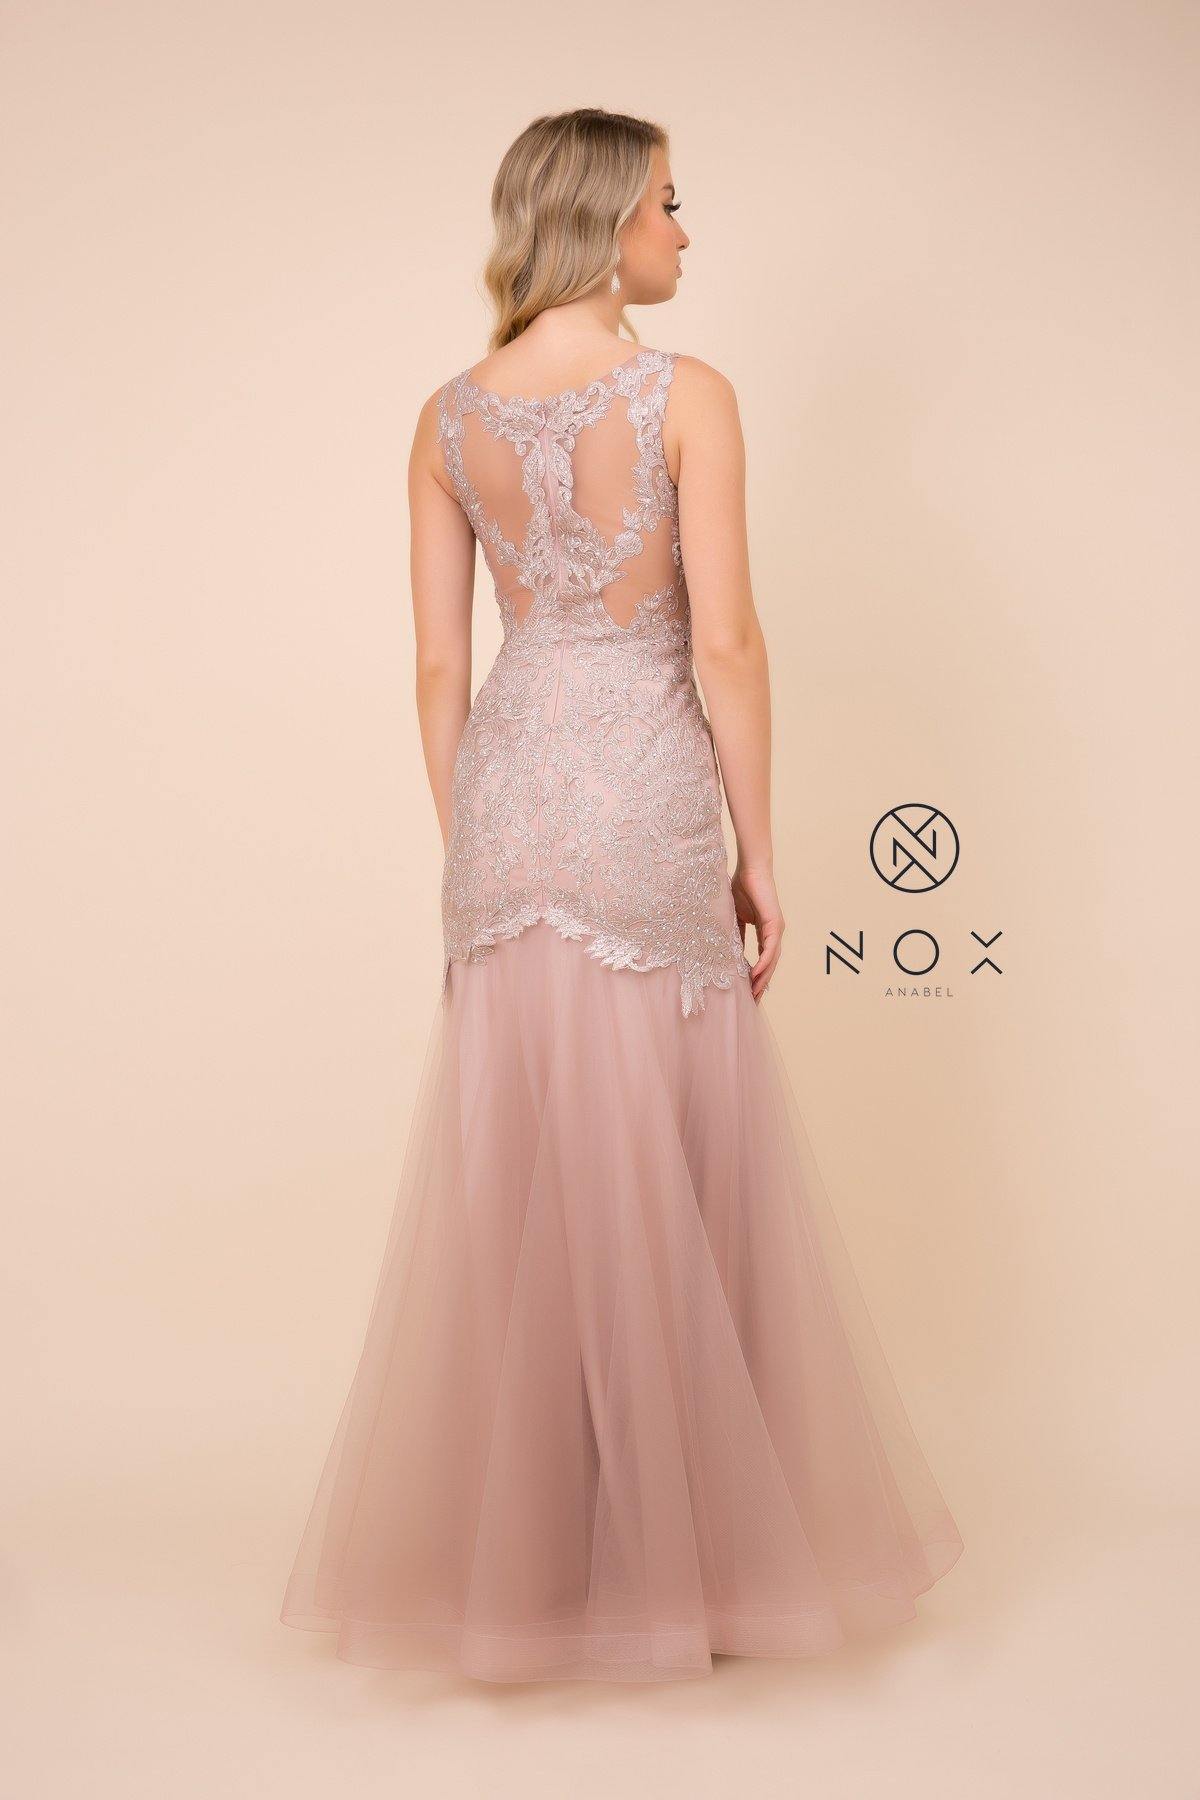 Long Formal Sleeveless Mermaid Prom Dress - The Dress Outlet Nox Anabel